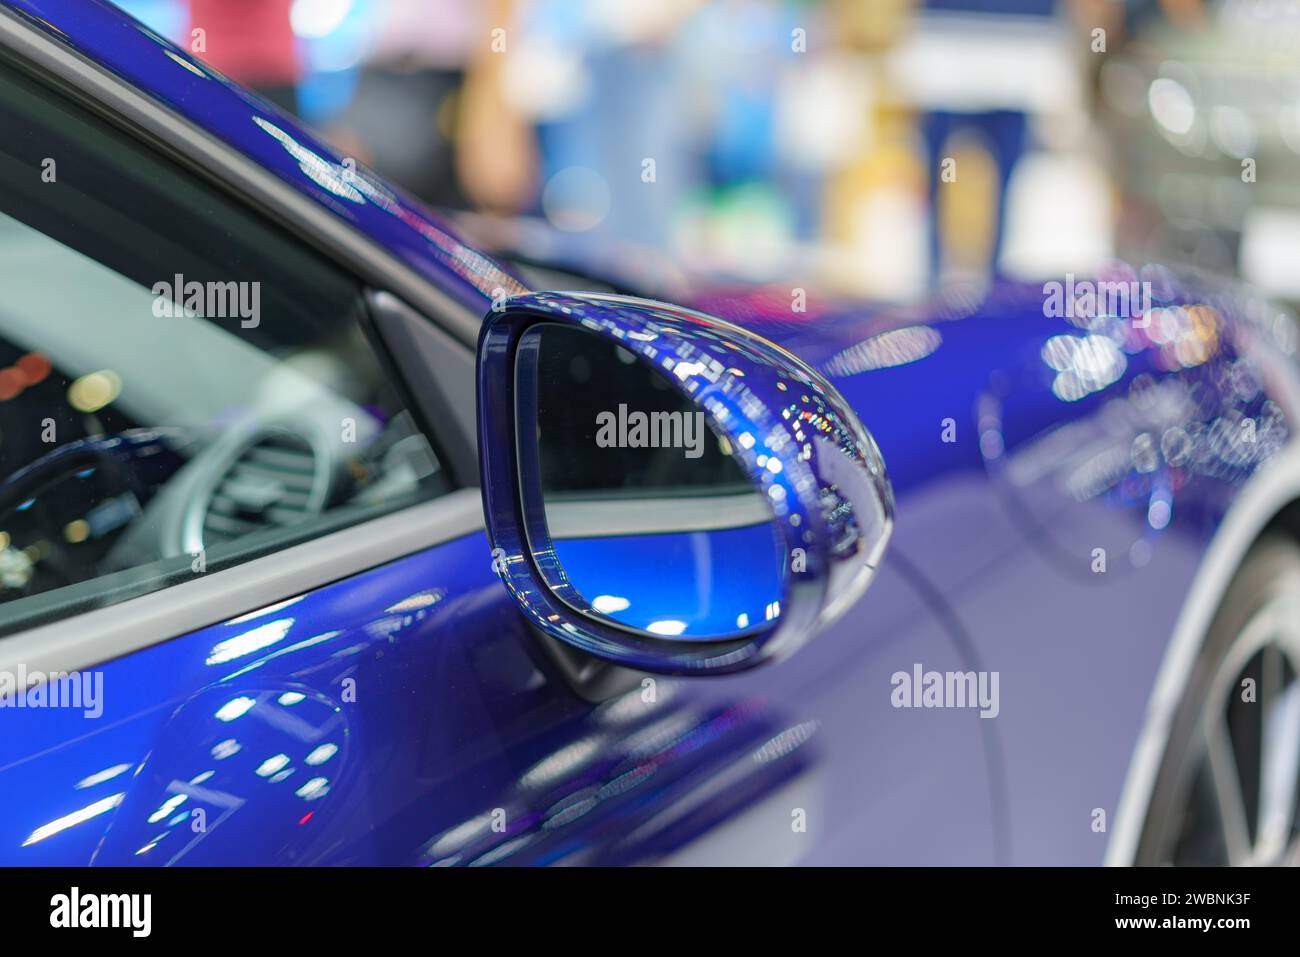 close-up shot showcasing the sleek blue side mirror of a modern car reflective surface and streamlined design exude contemporary style, embodying the Stock Photo